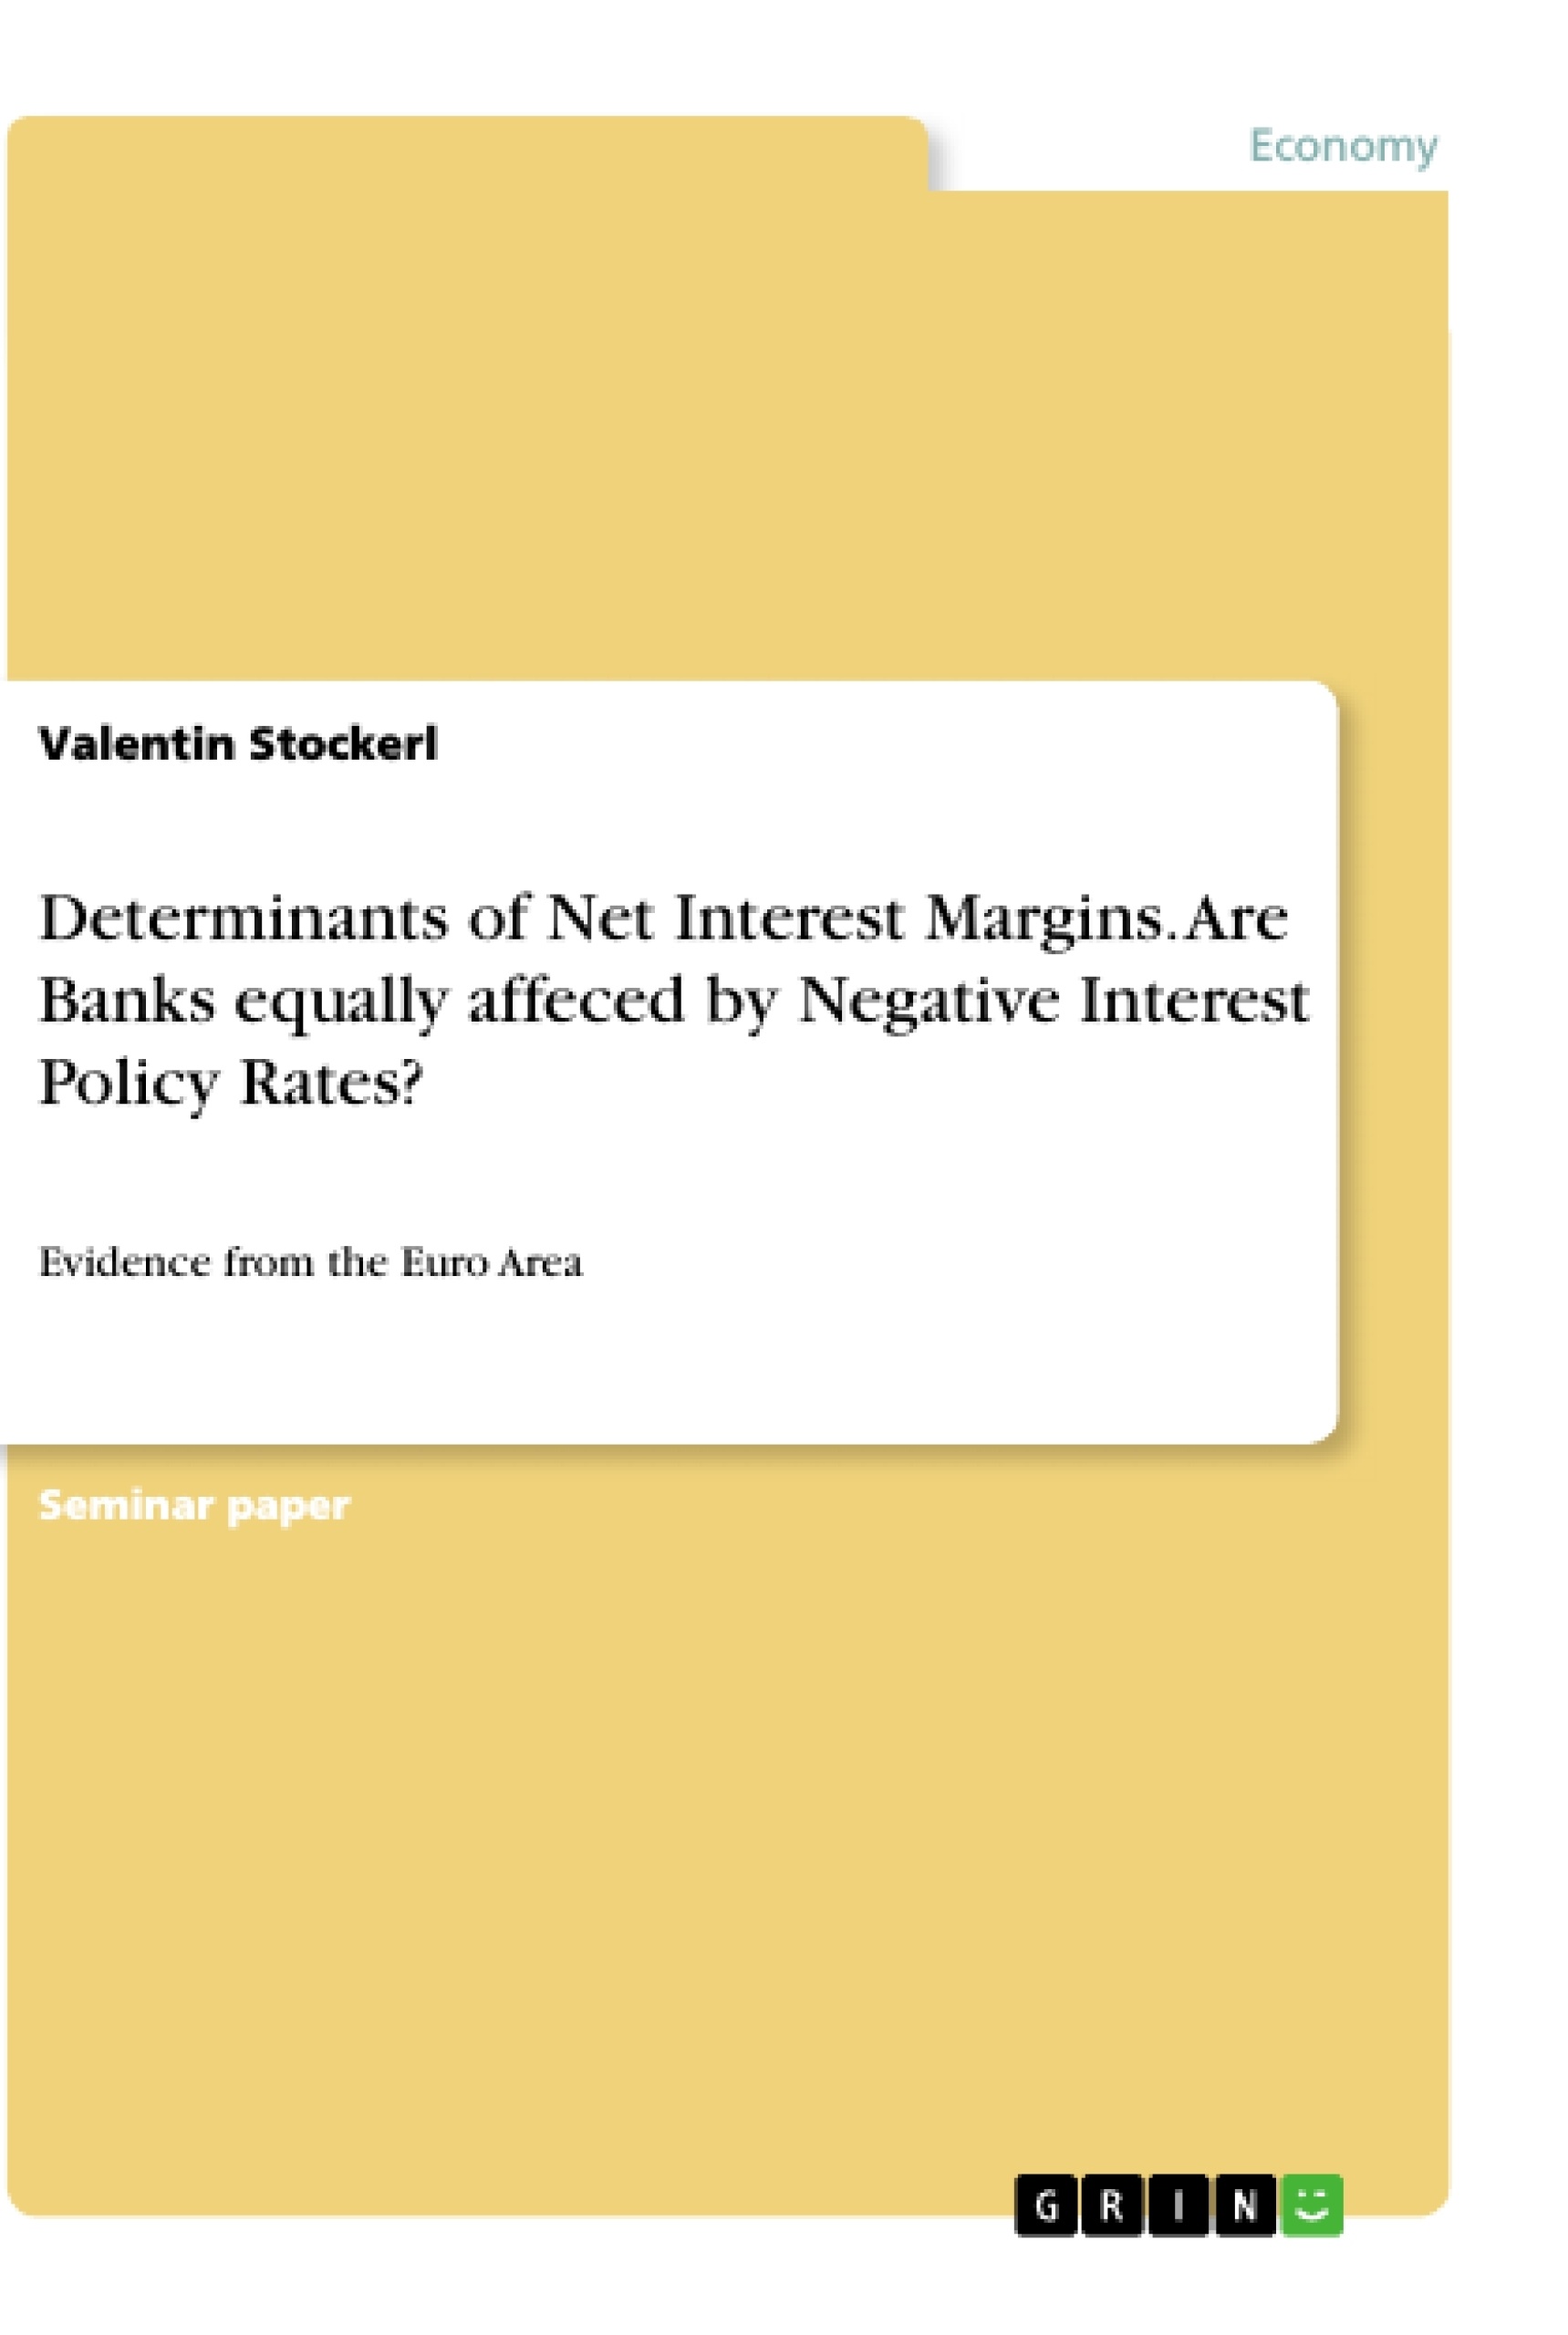 Título: Determinants of Net Interest Margins. Are Banks equally affeced by Negative Interest Policy Rates?